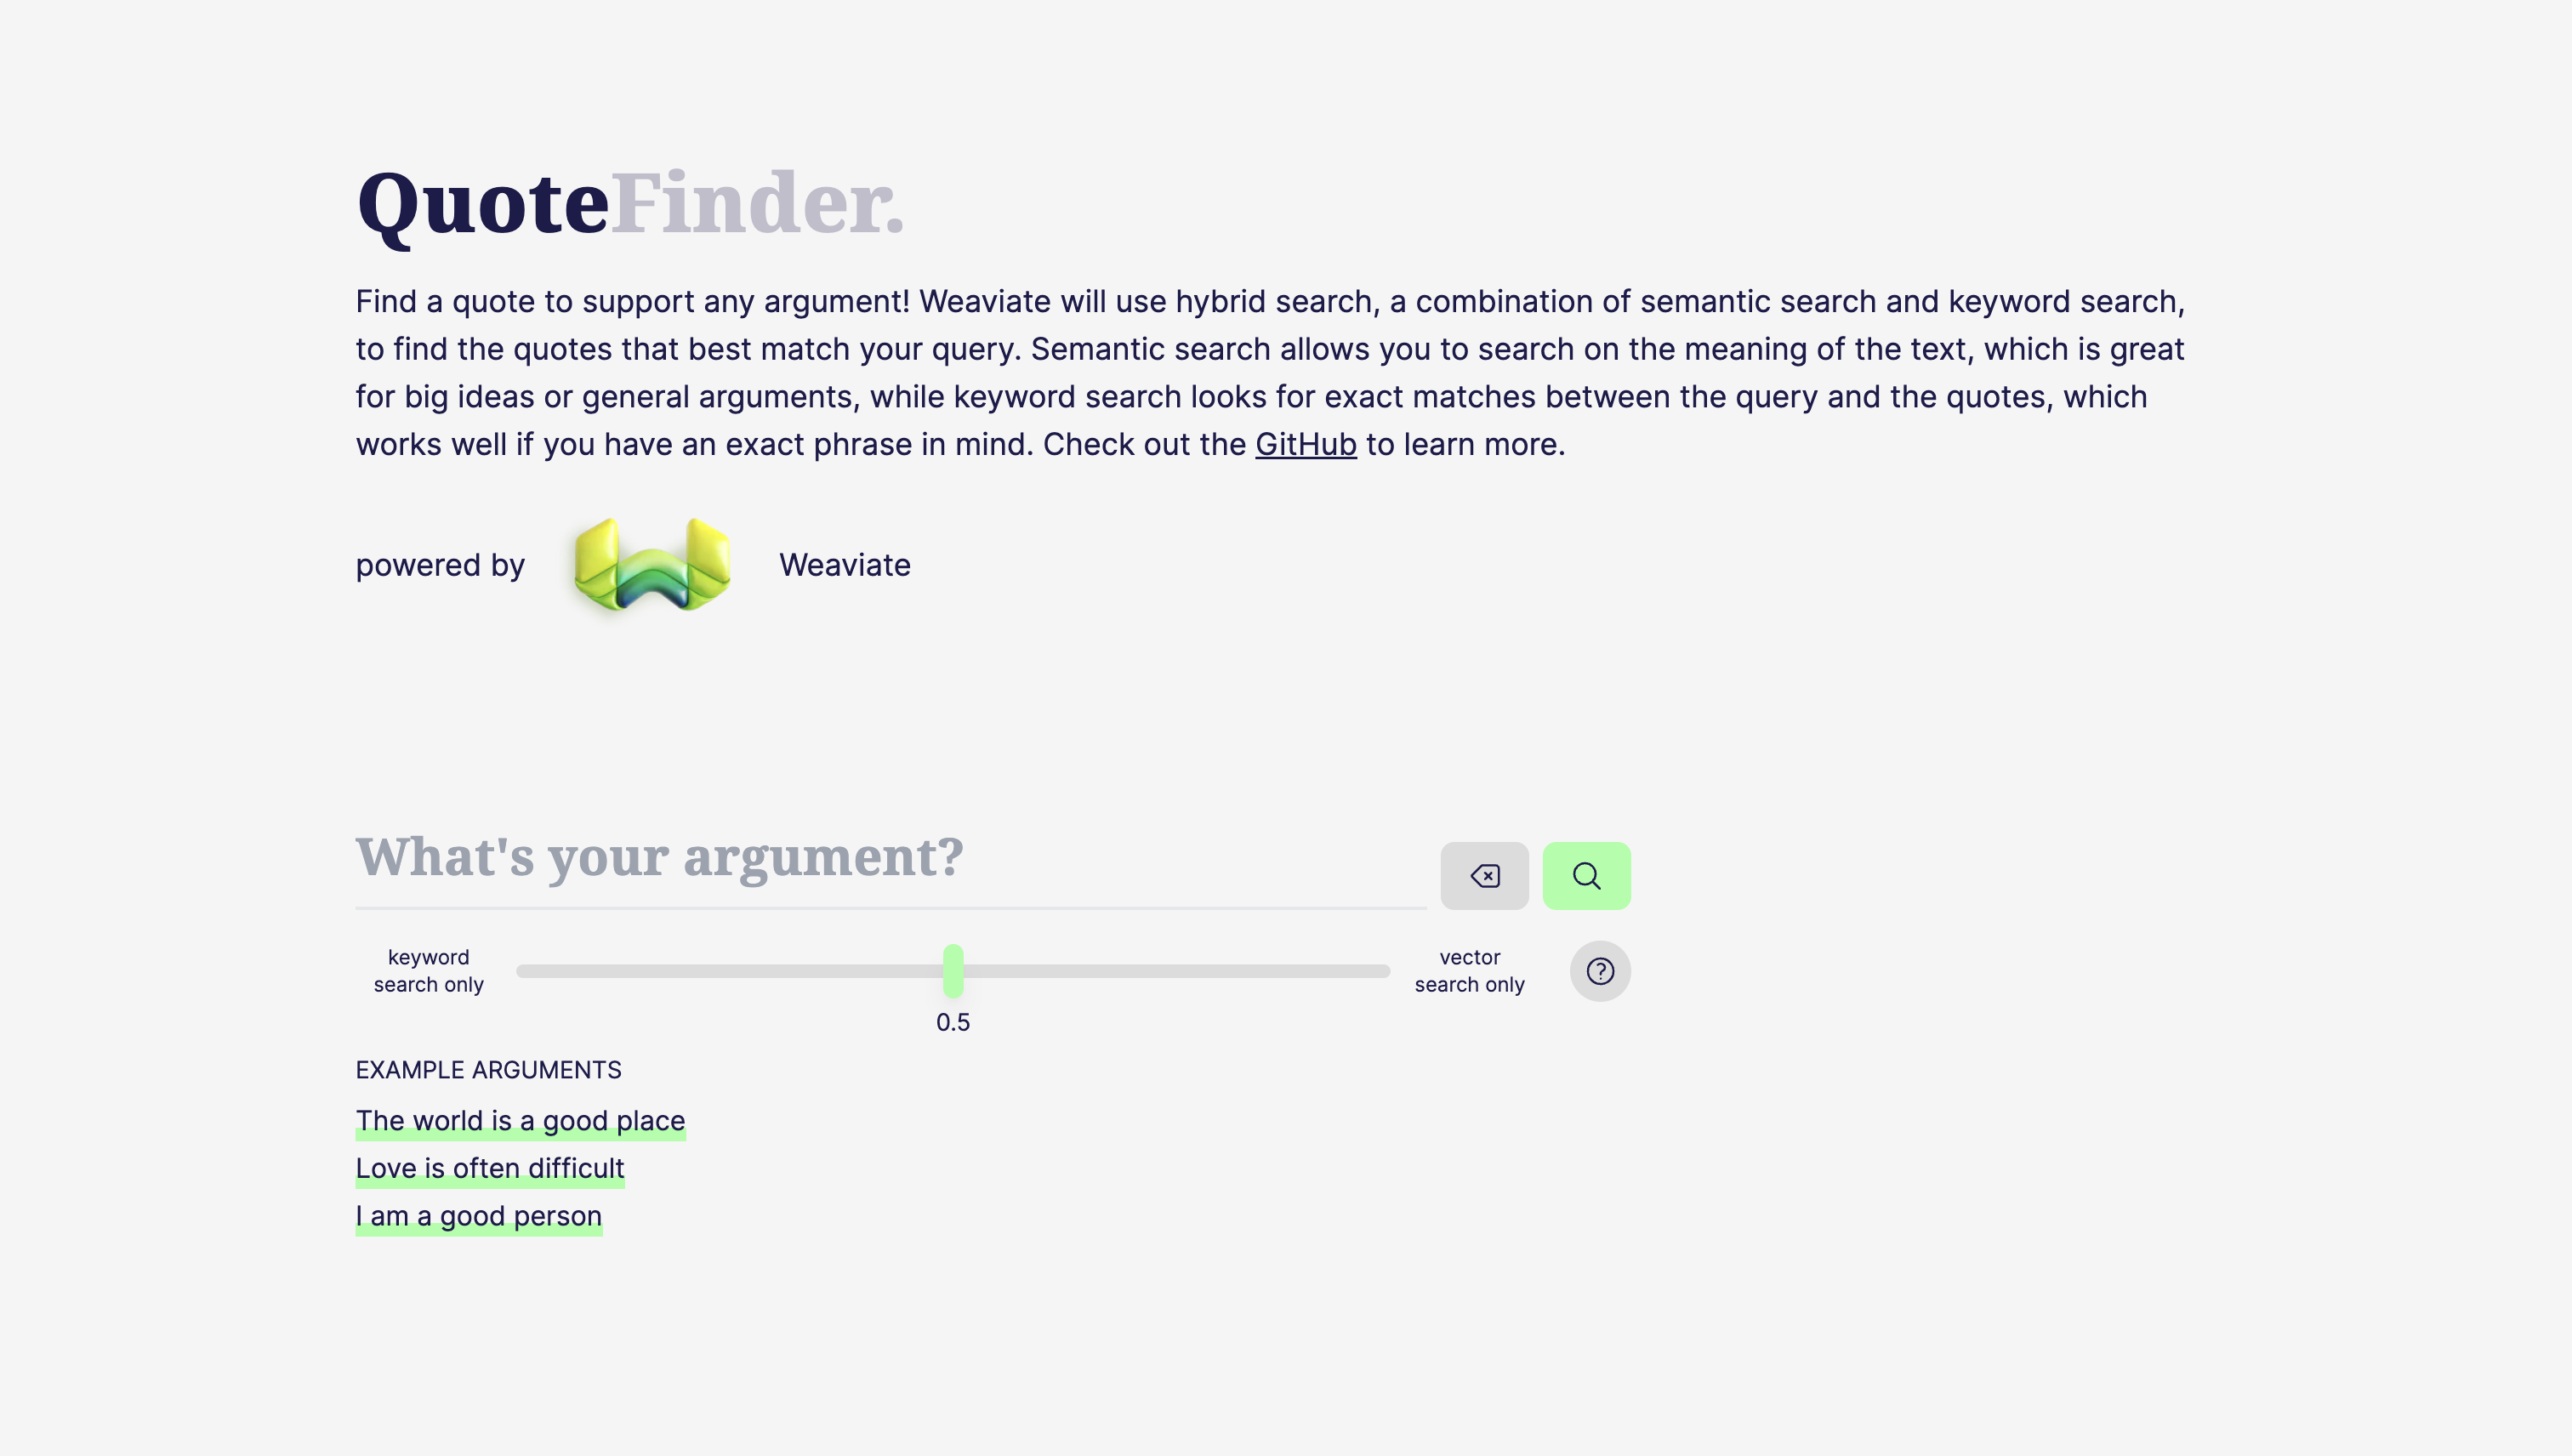 A screenshot of the QuoteFinder